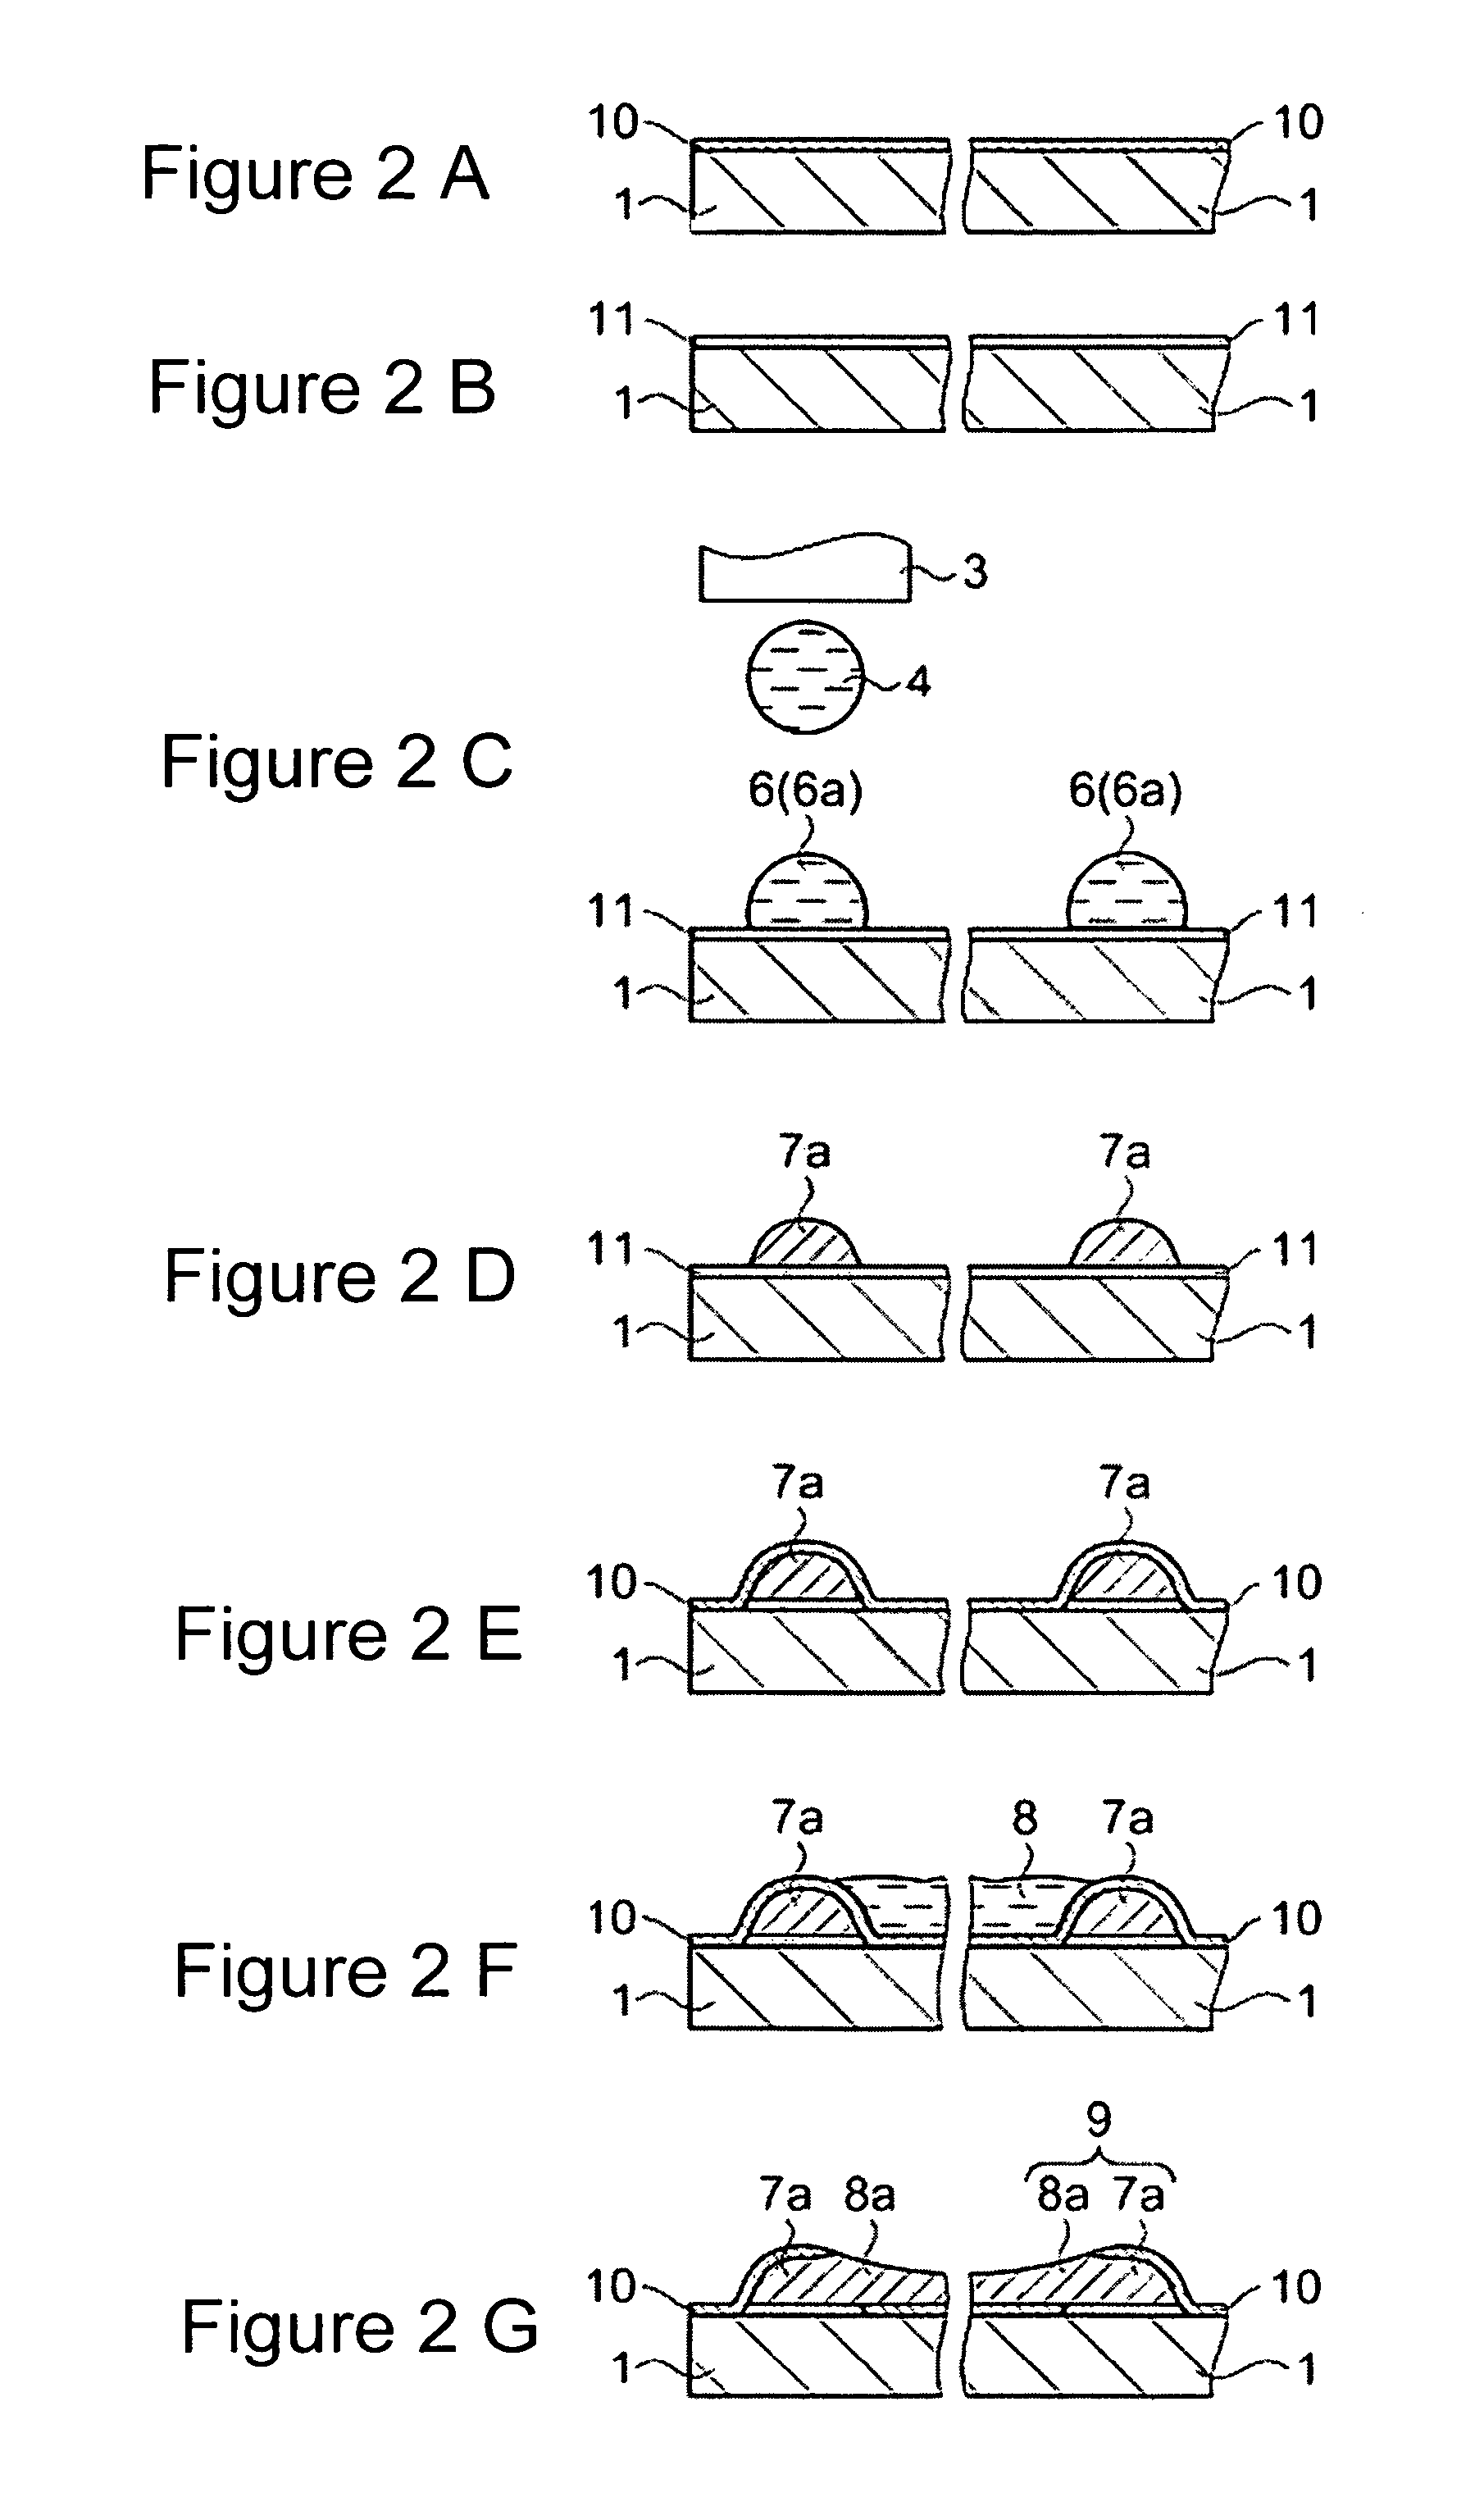 Film pattern forming method for forming a margin band and filling the margin band